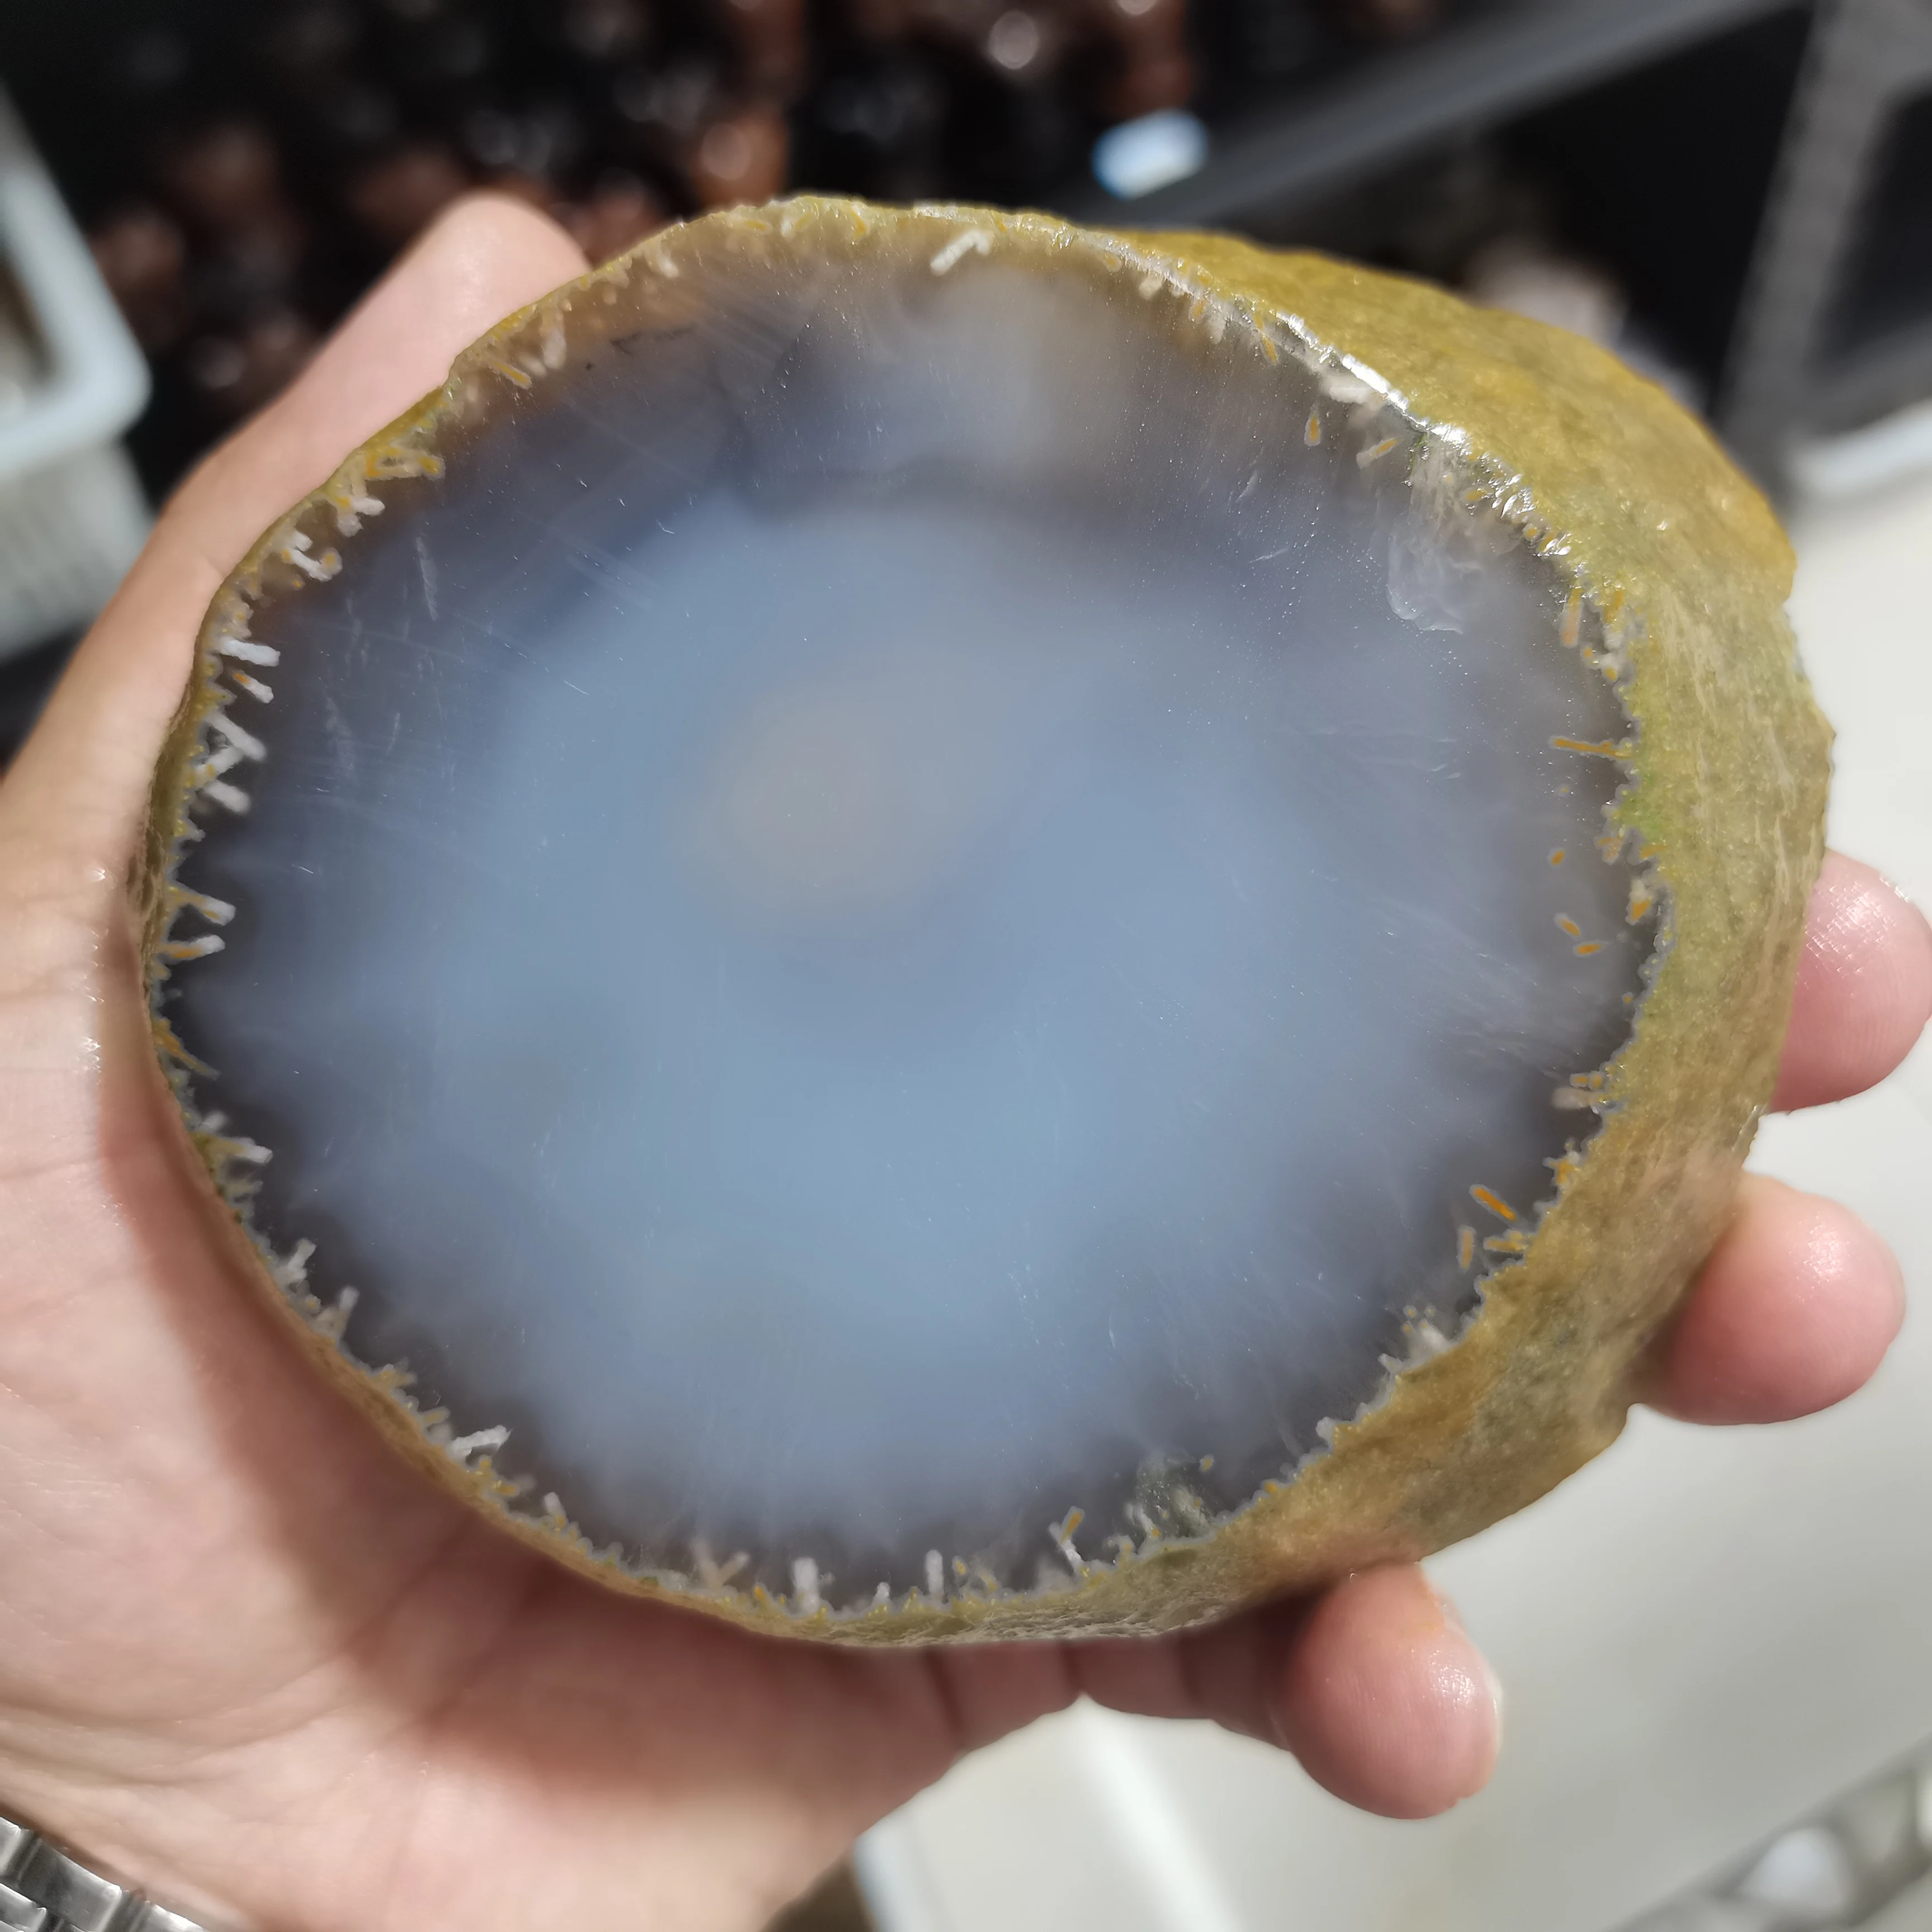 500g 100% Natural Enhydros agate from Madagascar polishing stone big bubble water power stone home decor healing 1pcs images - 6